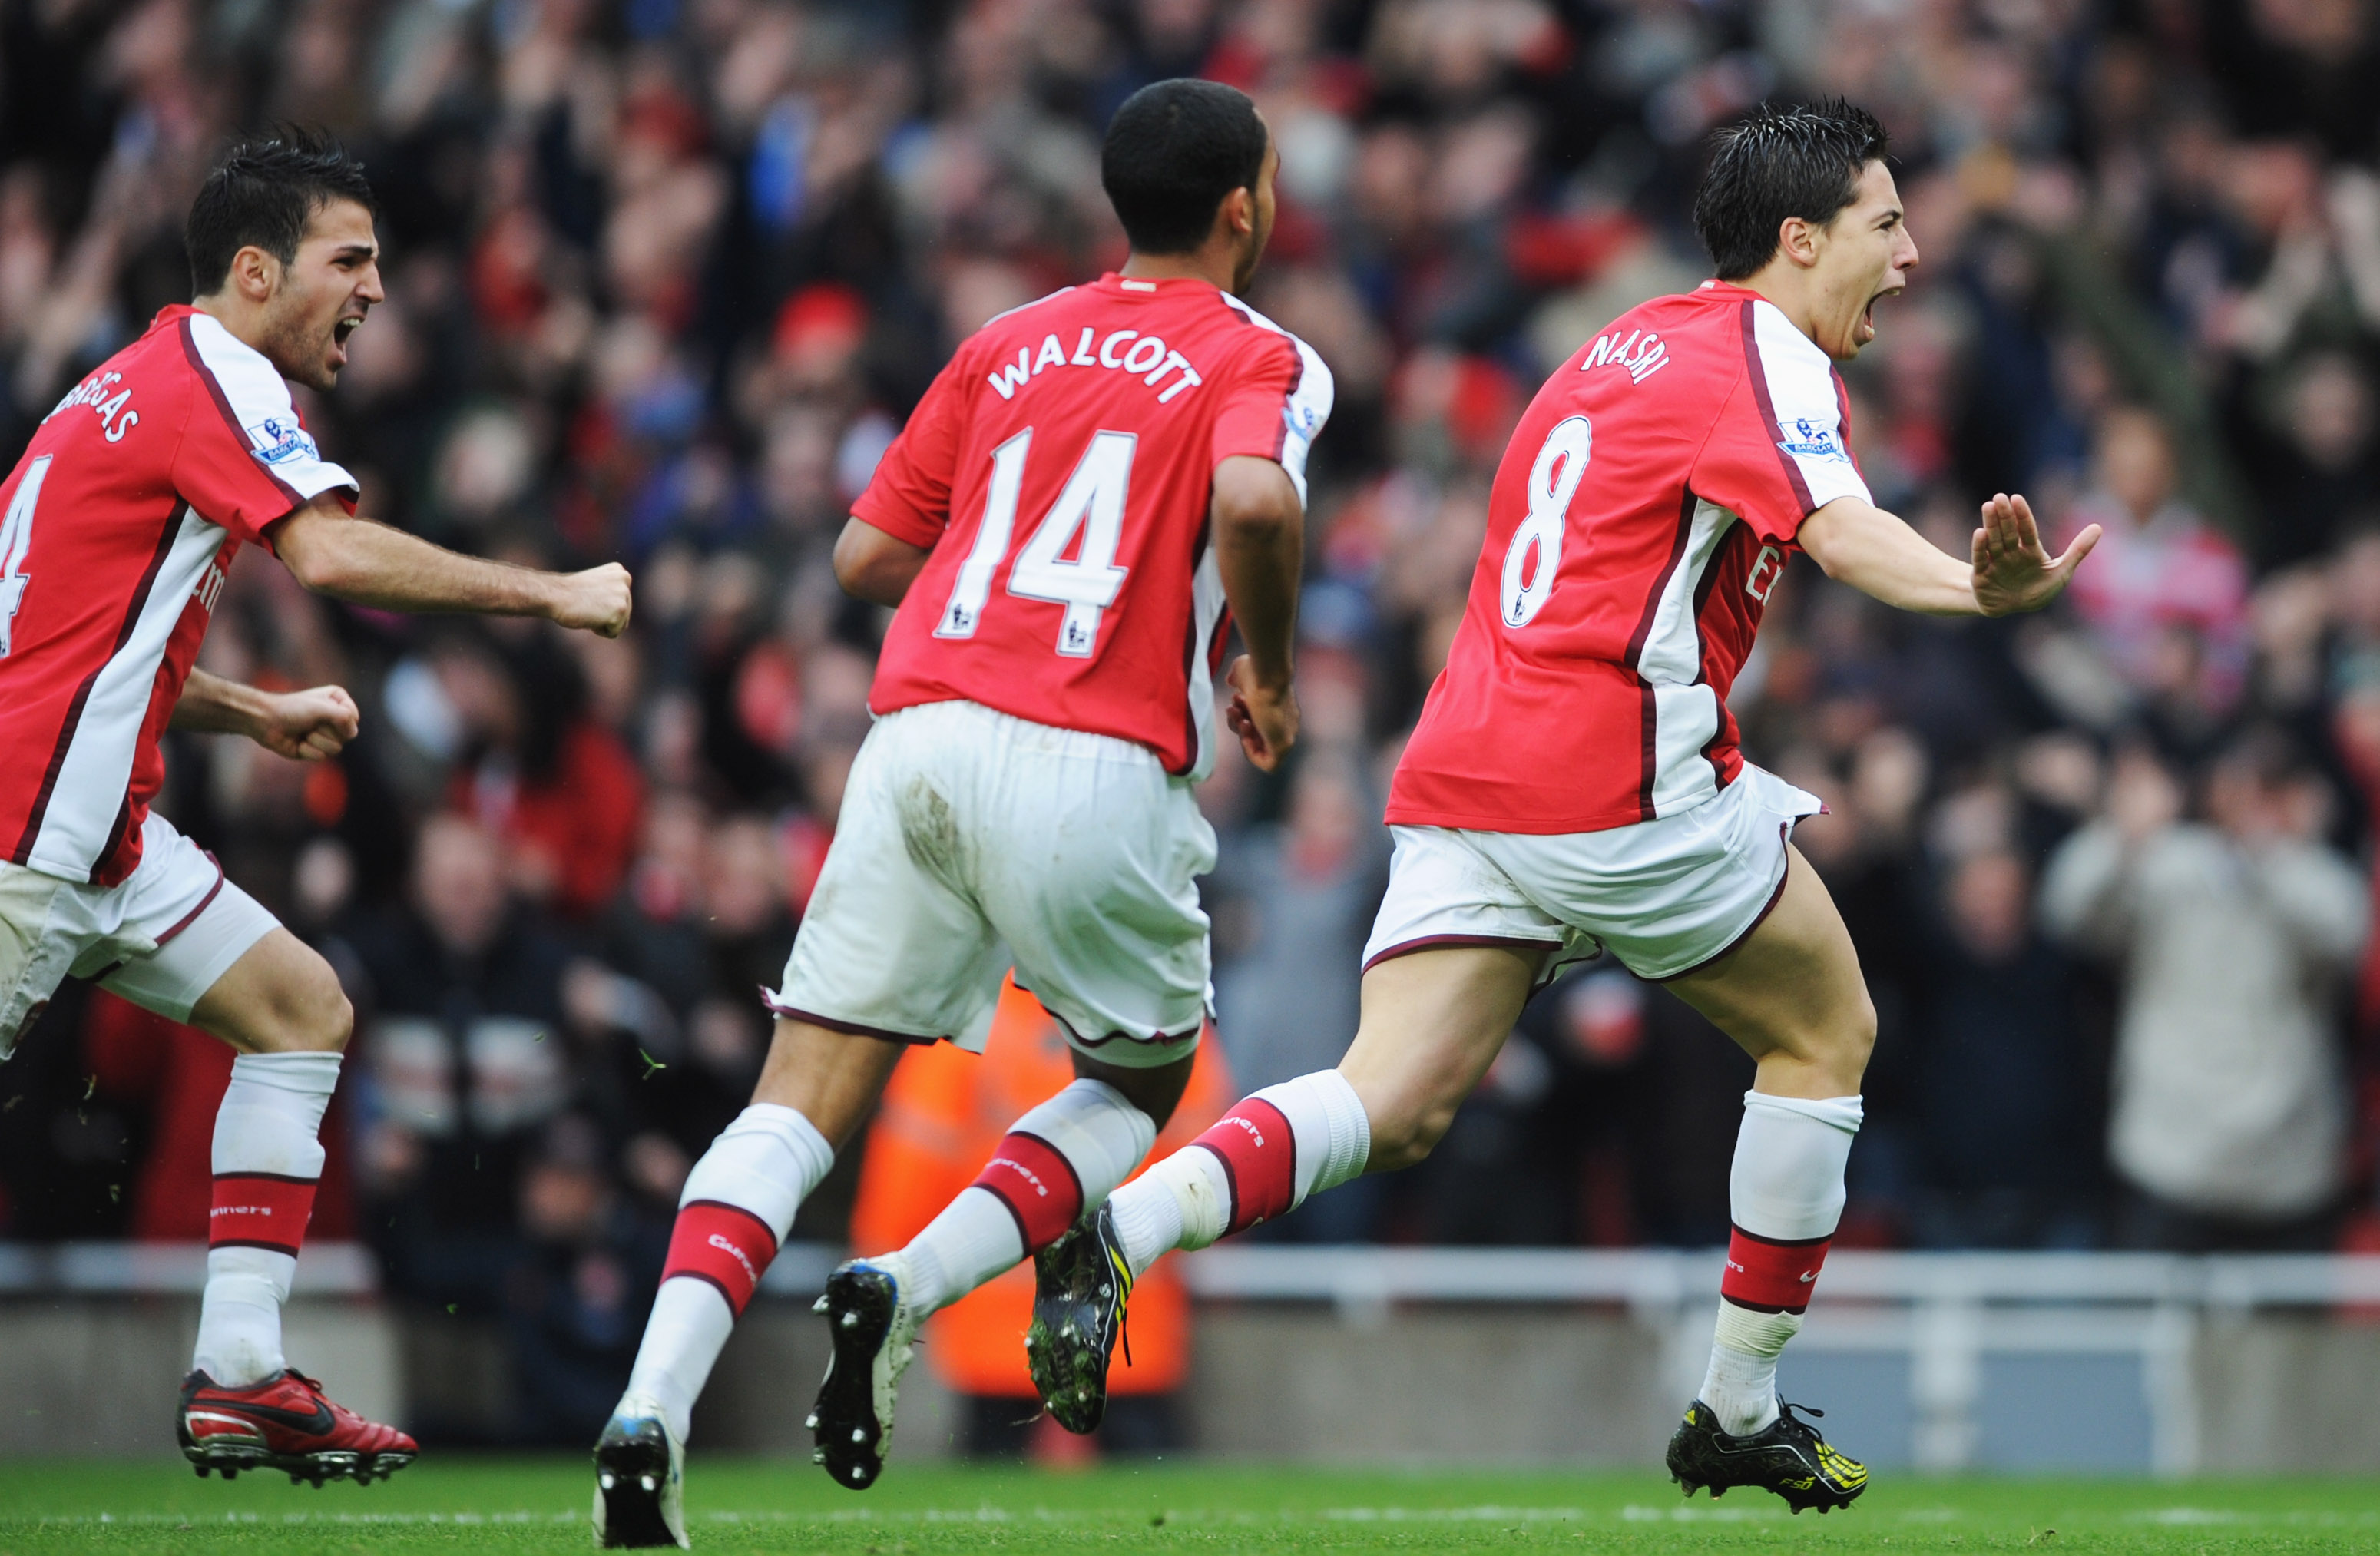 LONDON - NOVEMBER 08:  Samir Nasri of Arsenal (R) celebrates with Theo Walcott and Francesc Fabregas as he scores their second goal during the Barclays Premier League match between Arsenal and Manchester United at the Emirates Stadium on November 8, 2008